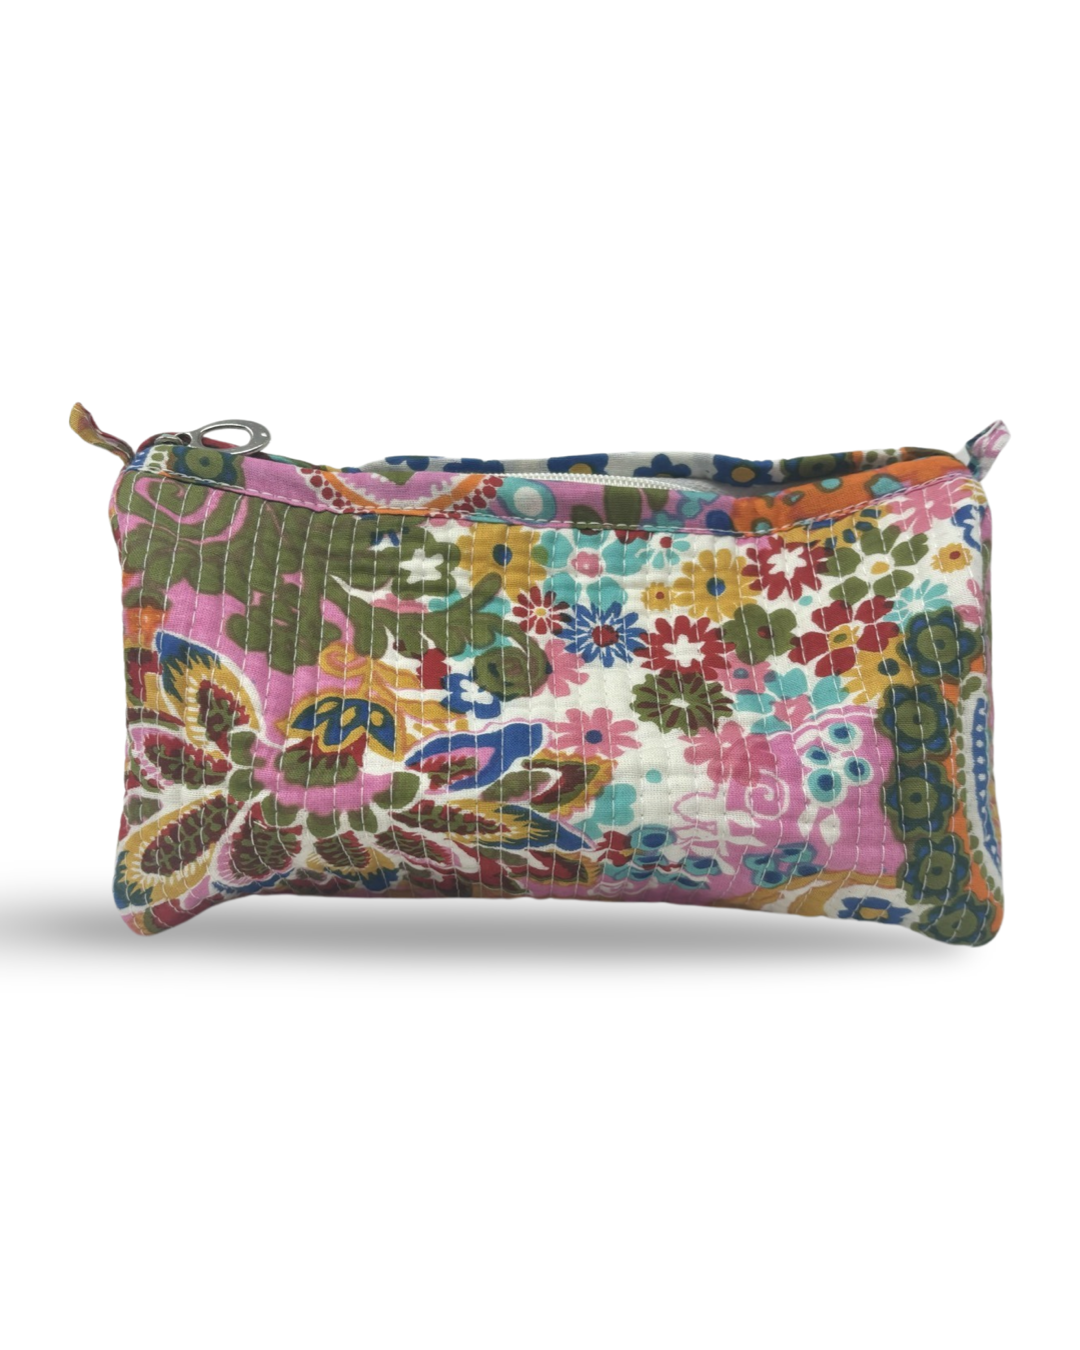 Block Print Pouch in Paisley